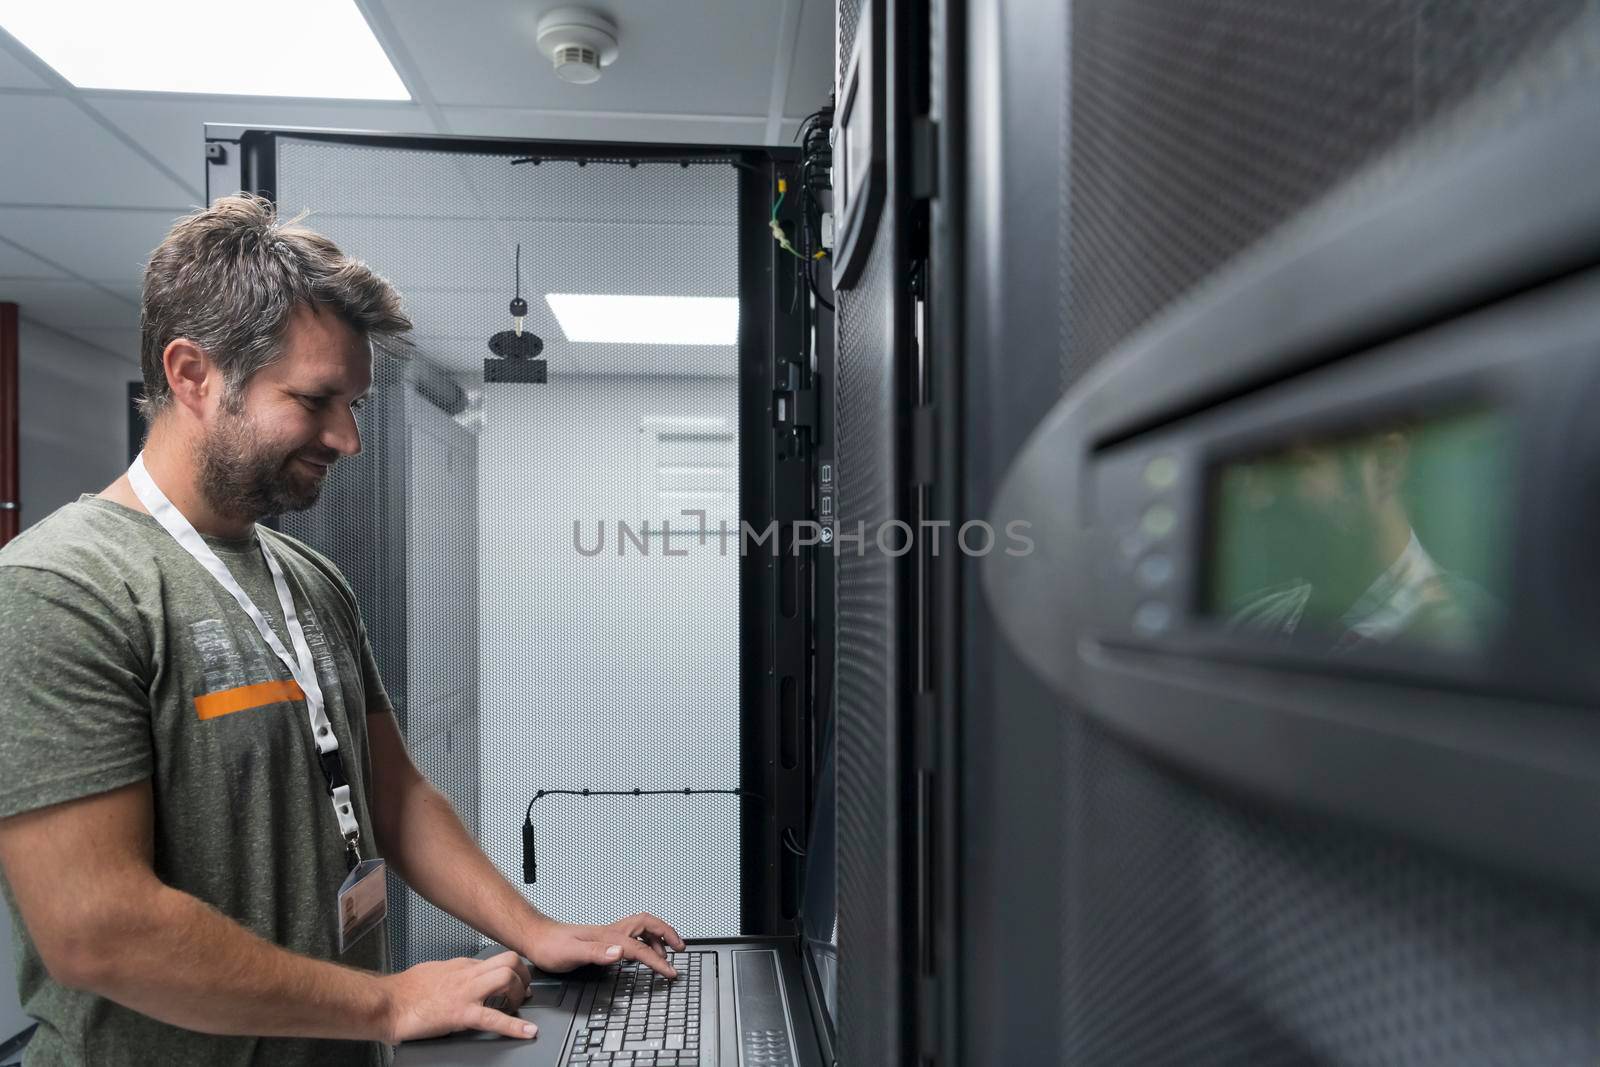 Data Center Engineer Usaing Keyboard on a Supercomputer. Server Room Specialist Facility with Male System Administrator Working with Data Protection Network for Cyber Security or Cryptocurrency Mining Farm